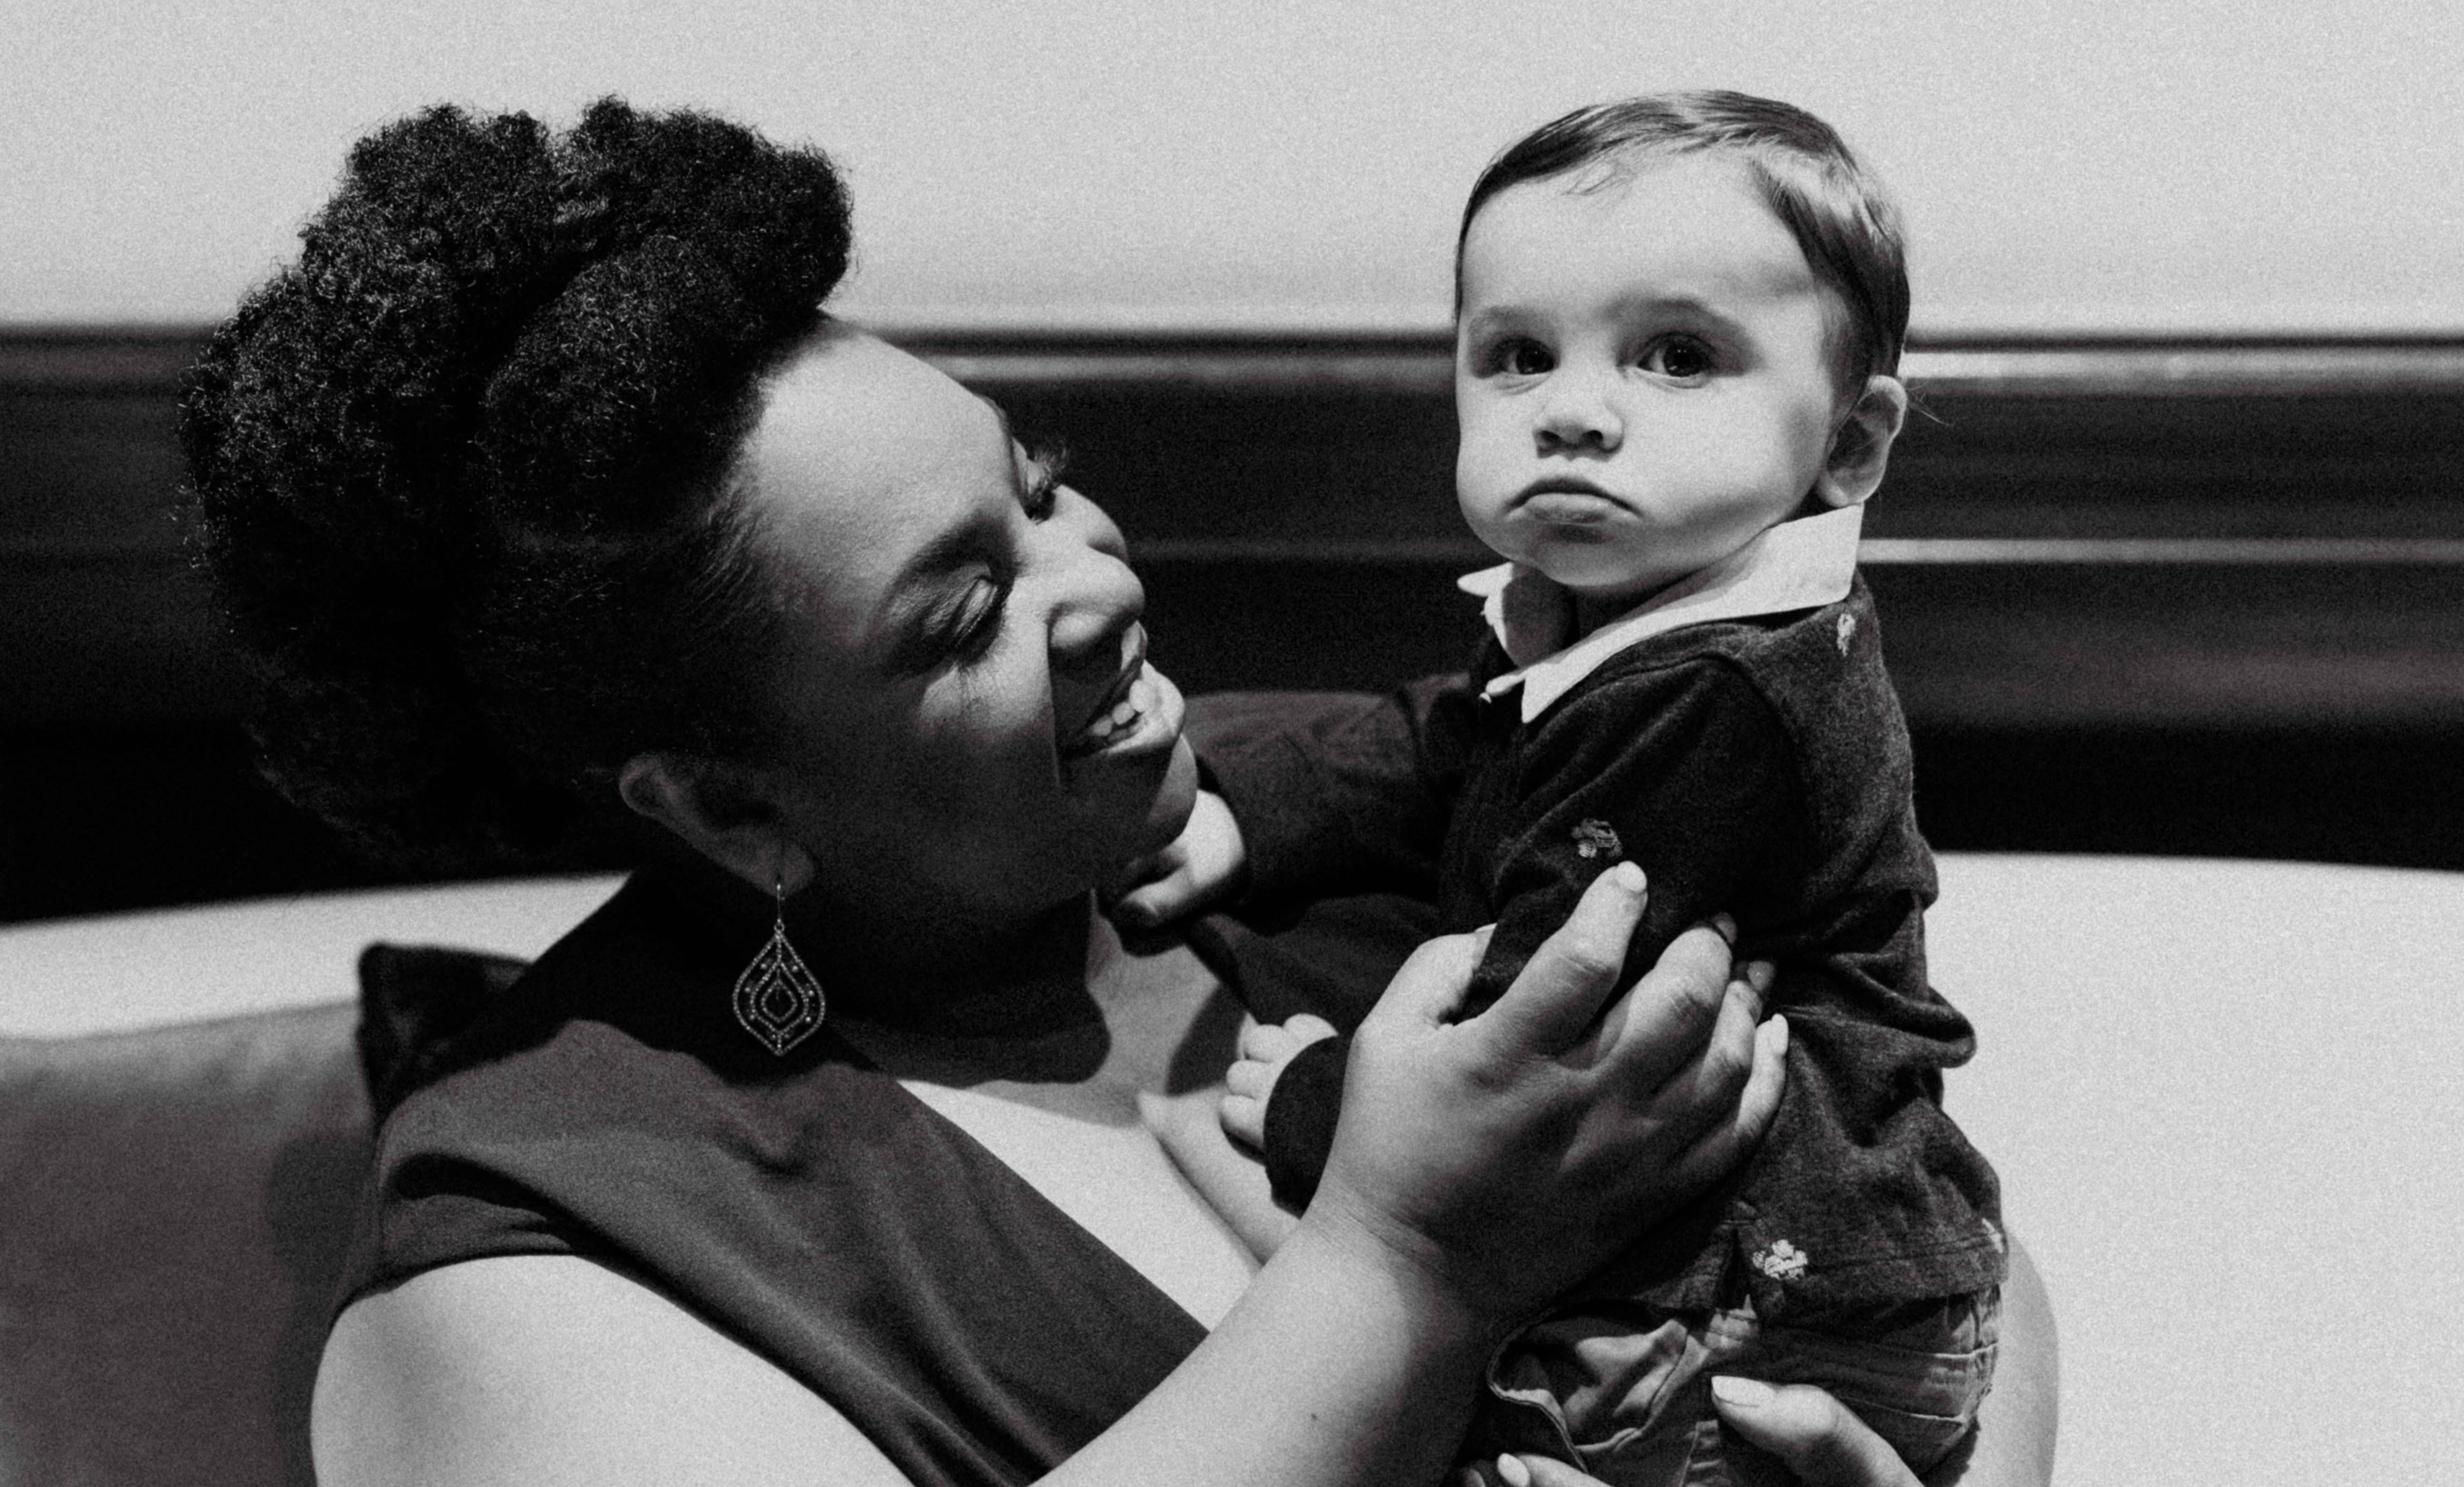 Tamika Felder, a cervical cancer advocate and motivational speaker, holds her son, Chayton, during a quiet moment at a NYC event. He is sleeping in her arms with a pacifier in his mouth.